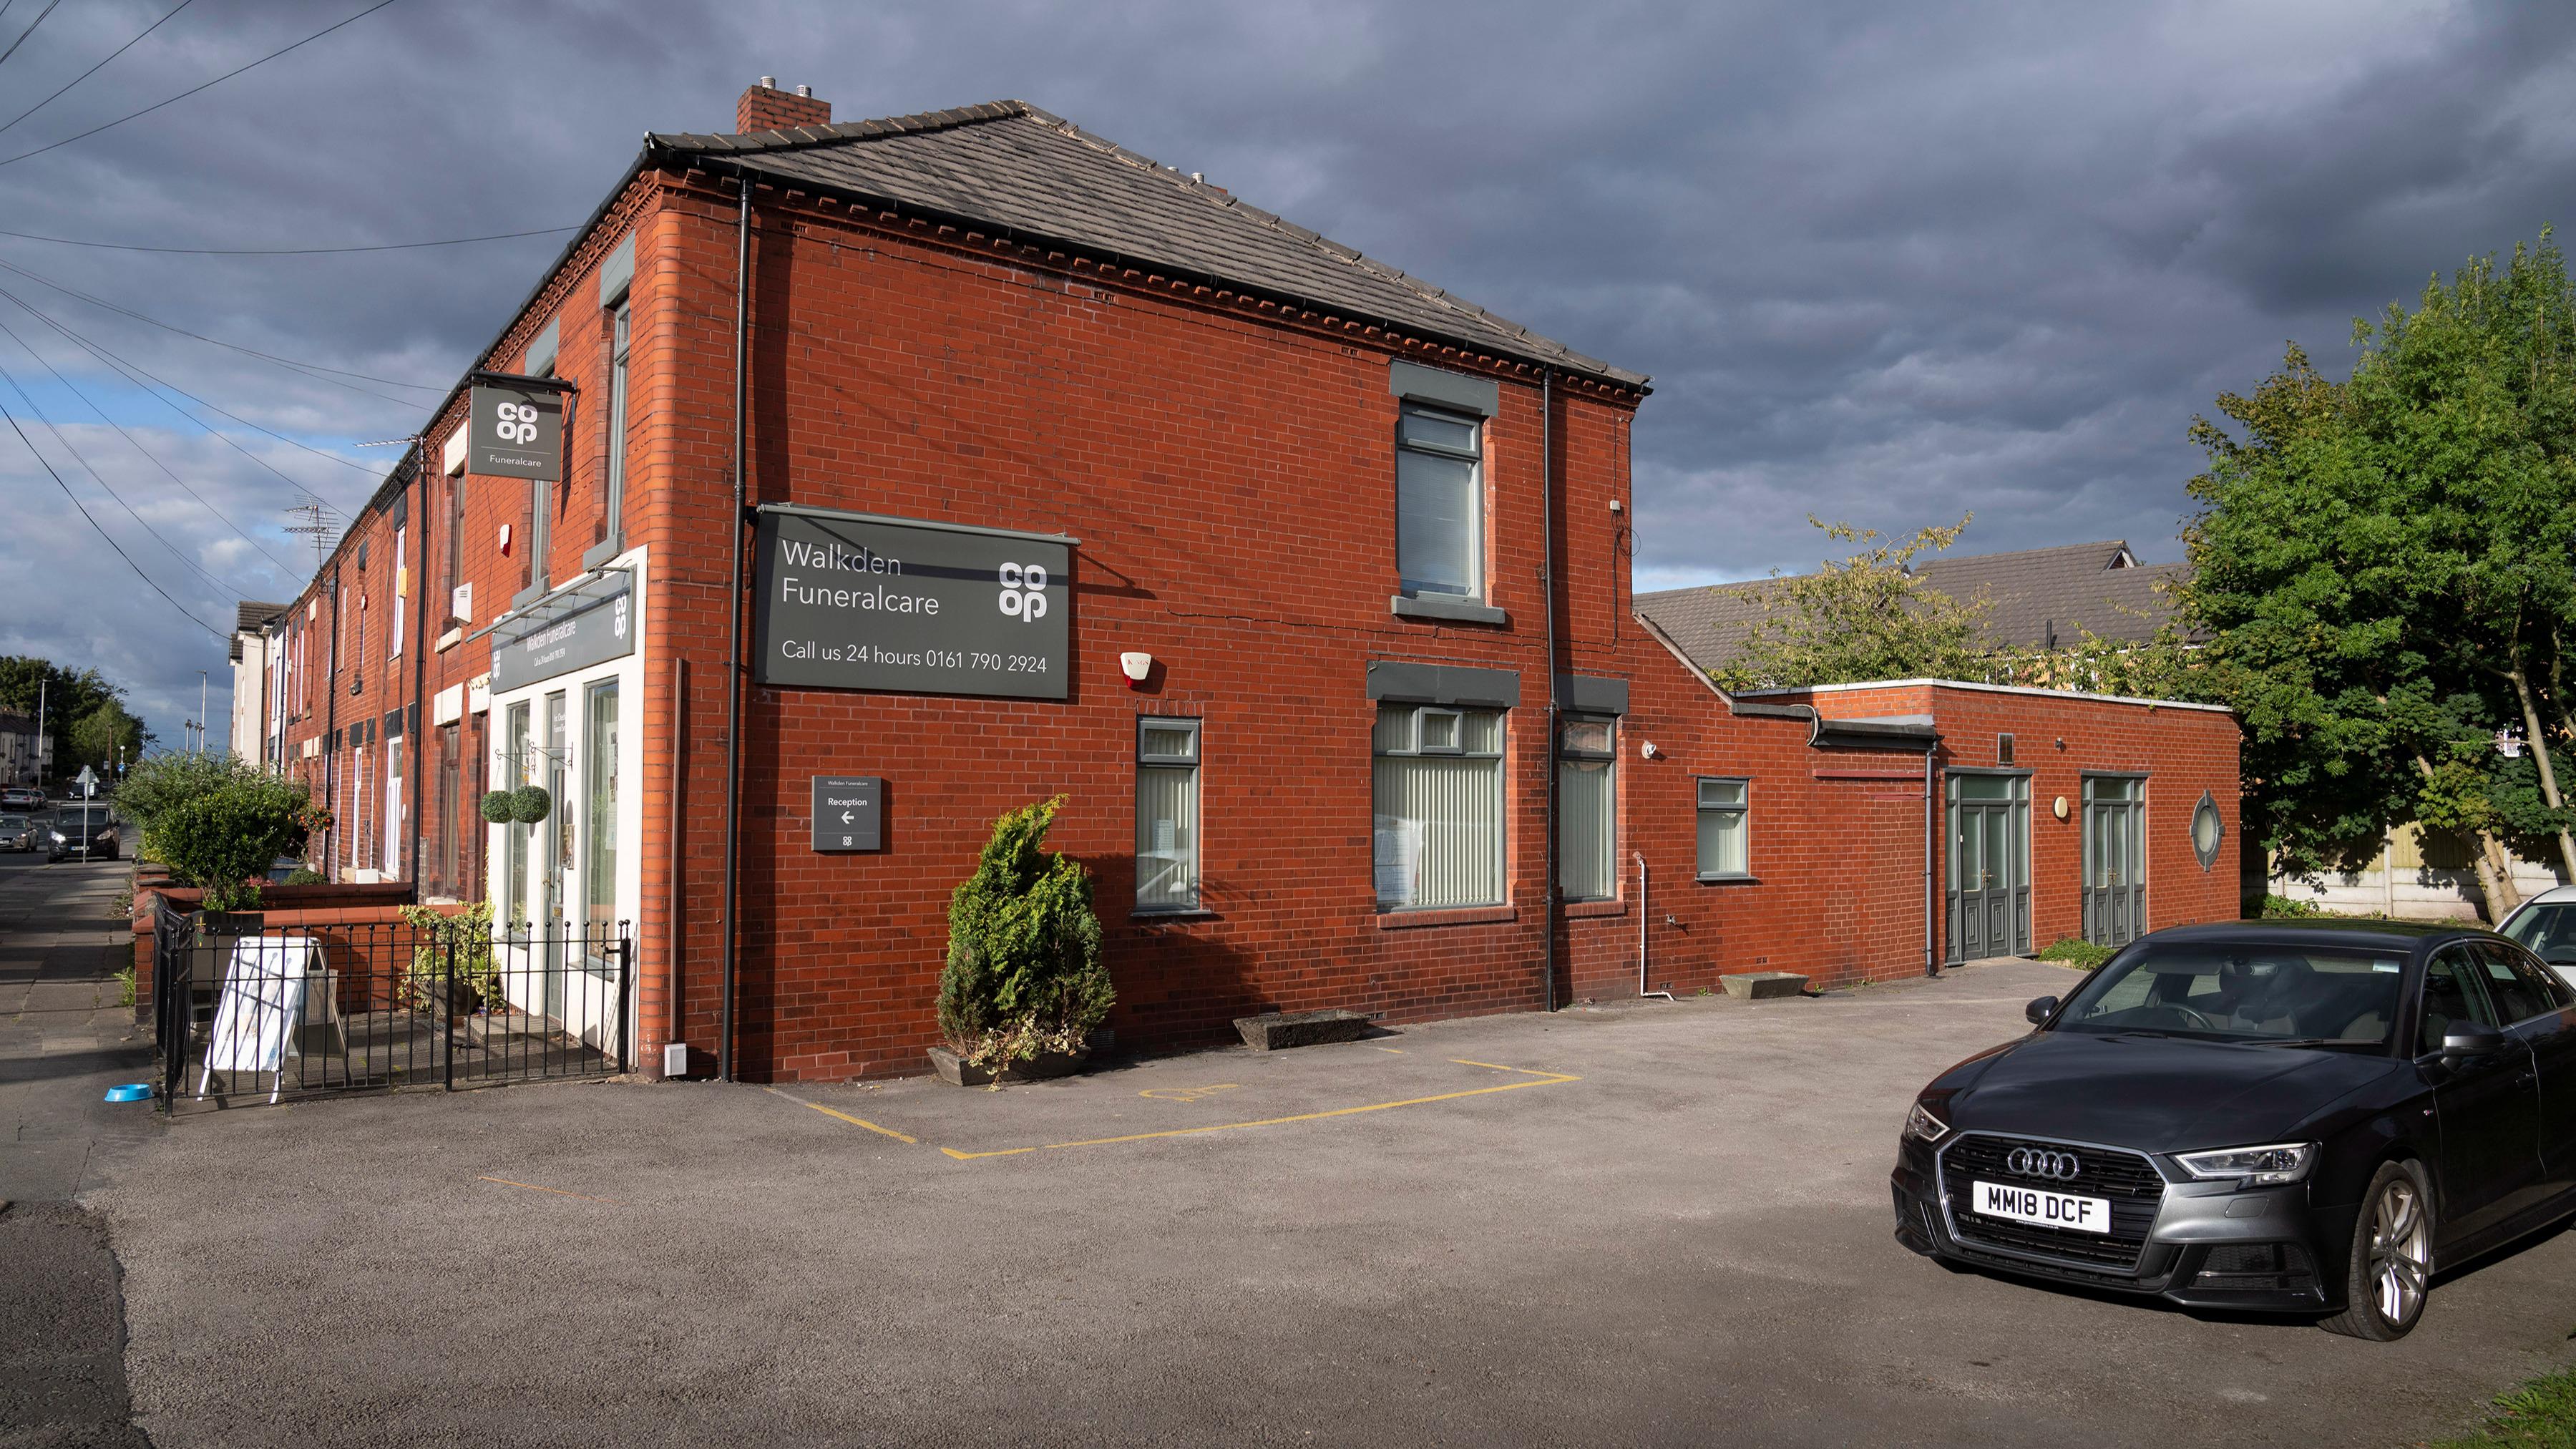 Images Walkden Funeralcare (inc. Cheethams Funeral Service)